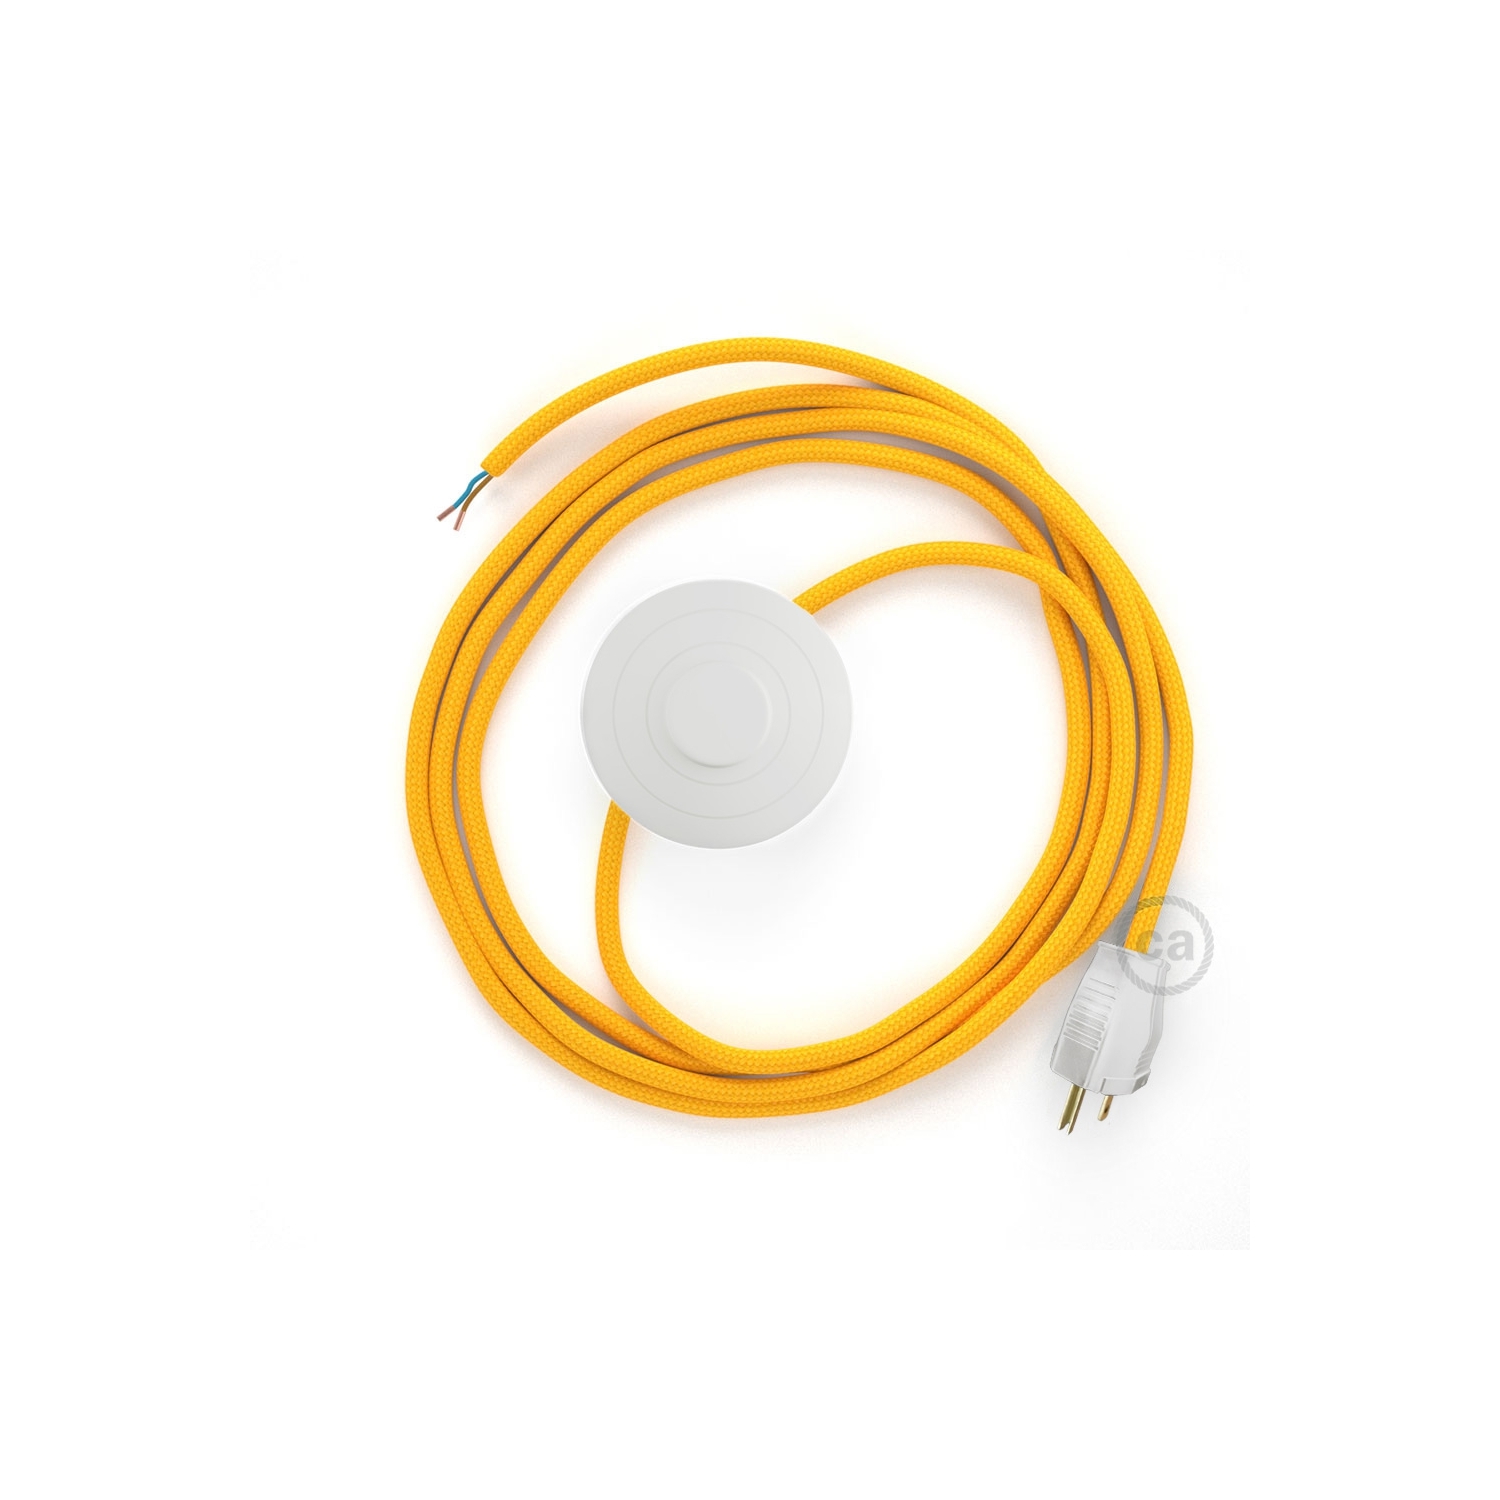 Power Cord with foot switch, RM10 Yellow Rayon - Choose color of switch/plug